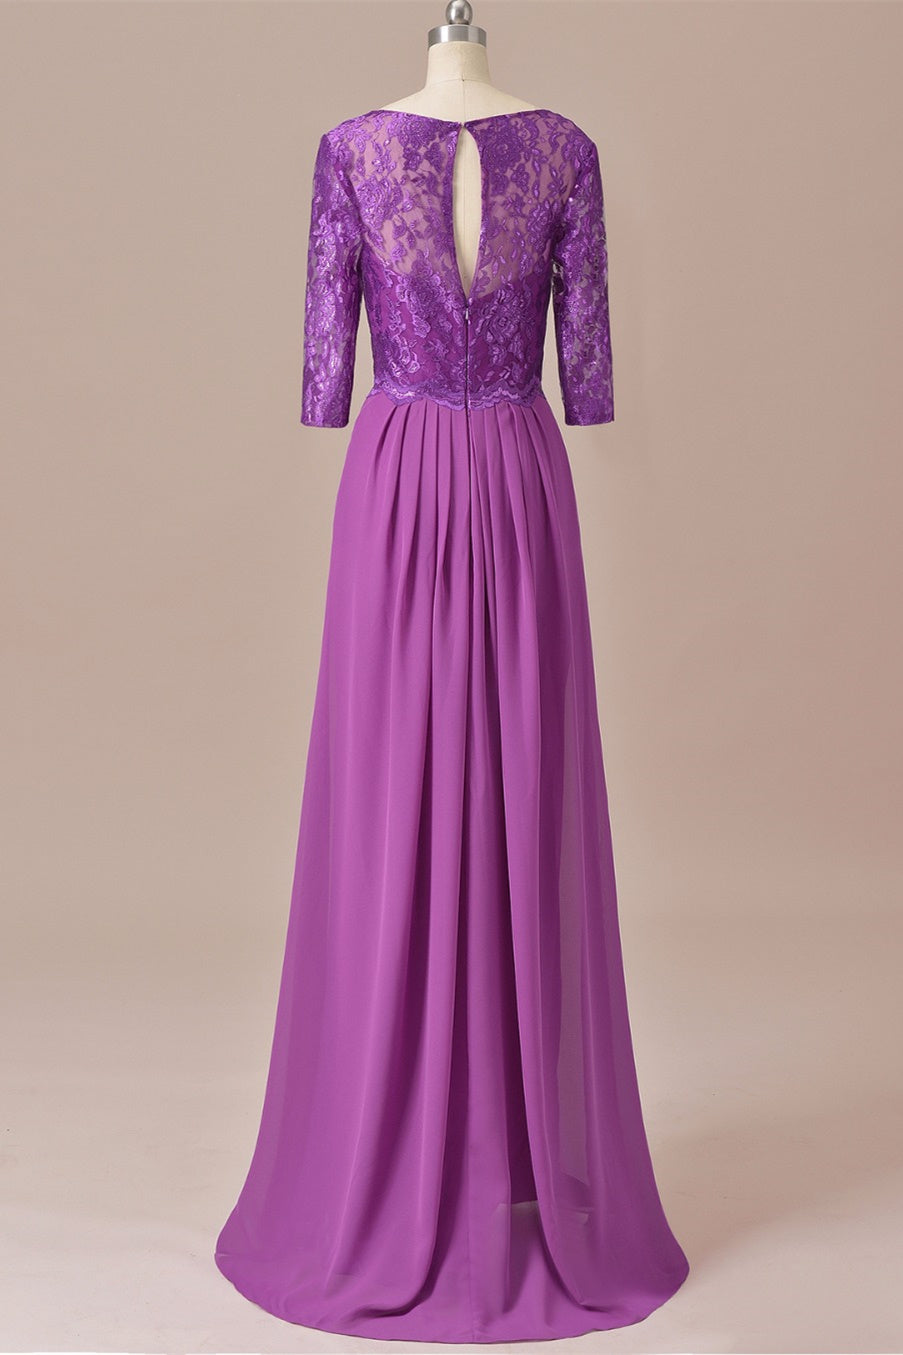 Homecoming Dresses Knee Length, Purple Lace Round Neck Keyhole Back Long Mother of the Bride Dress